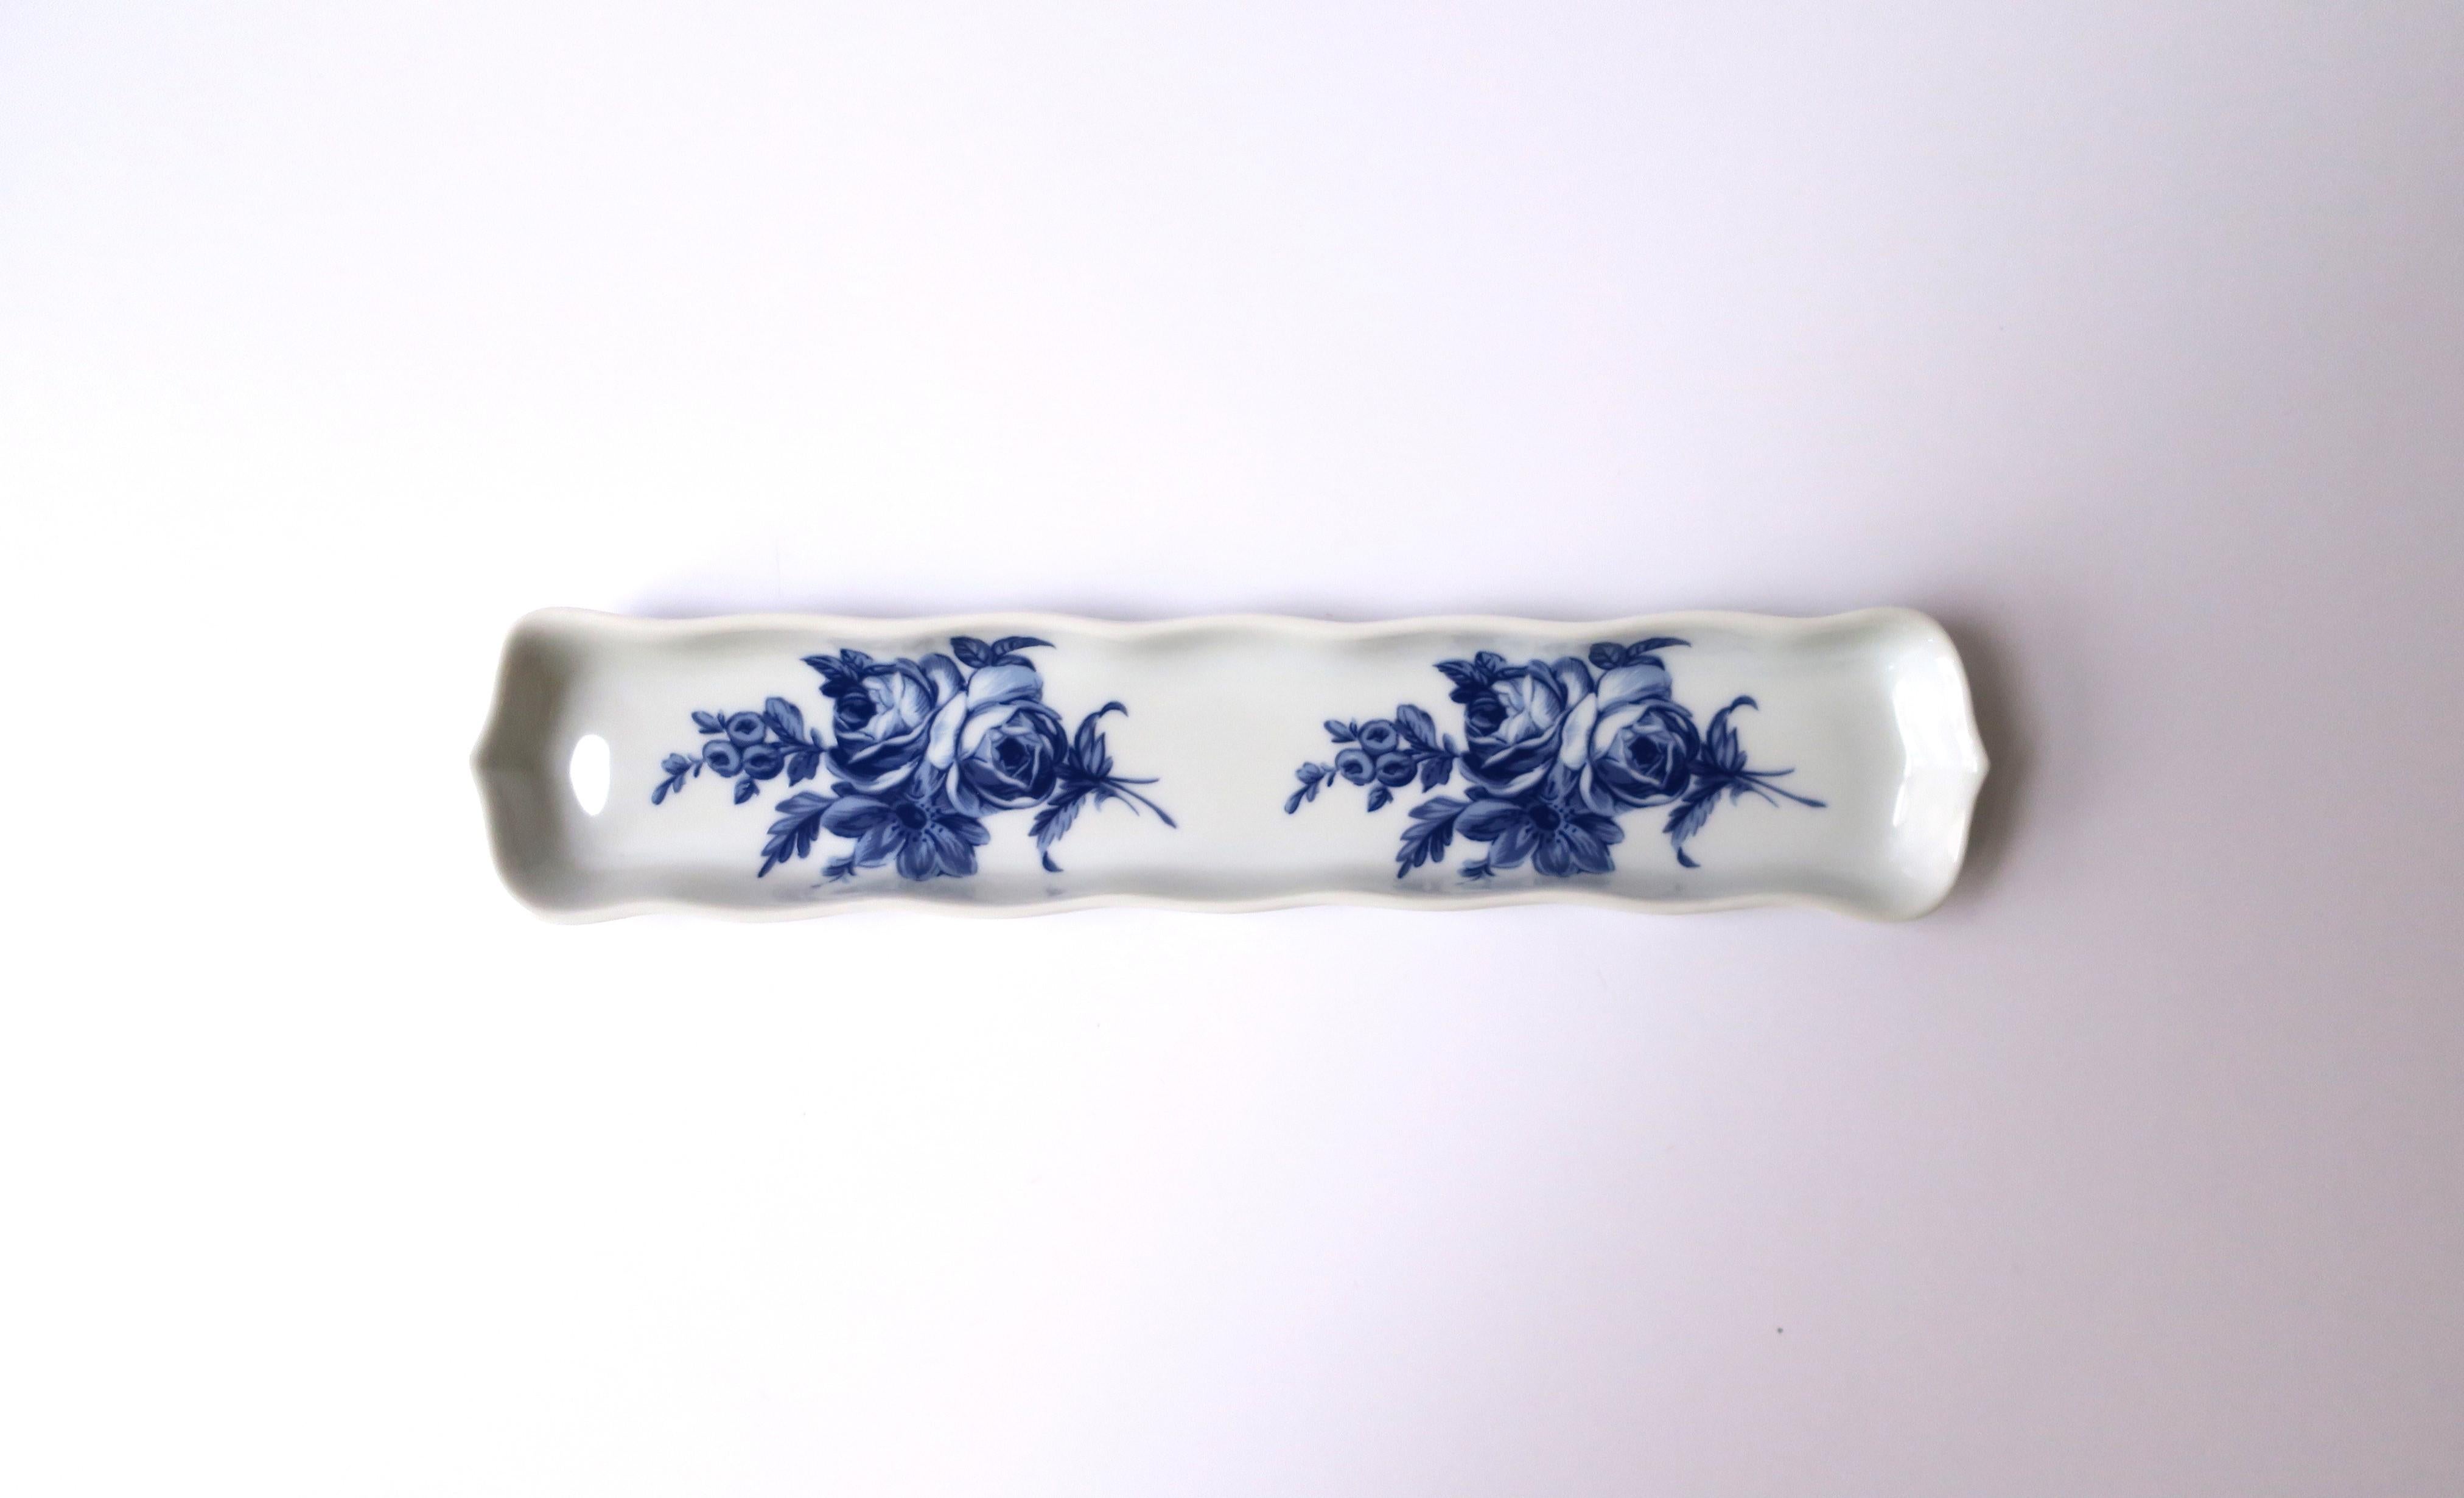 A French blue and white porcelain jewelry dish with a floral 'chintz' design, in the Rocco style, circa late-20th century, France. Made in France. A beautiful oblong piece with decorative edge and blue flowers. Great for holding jewelry on a